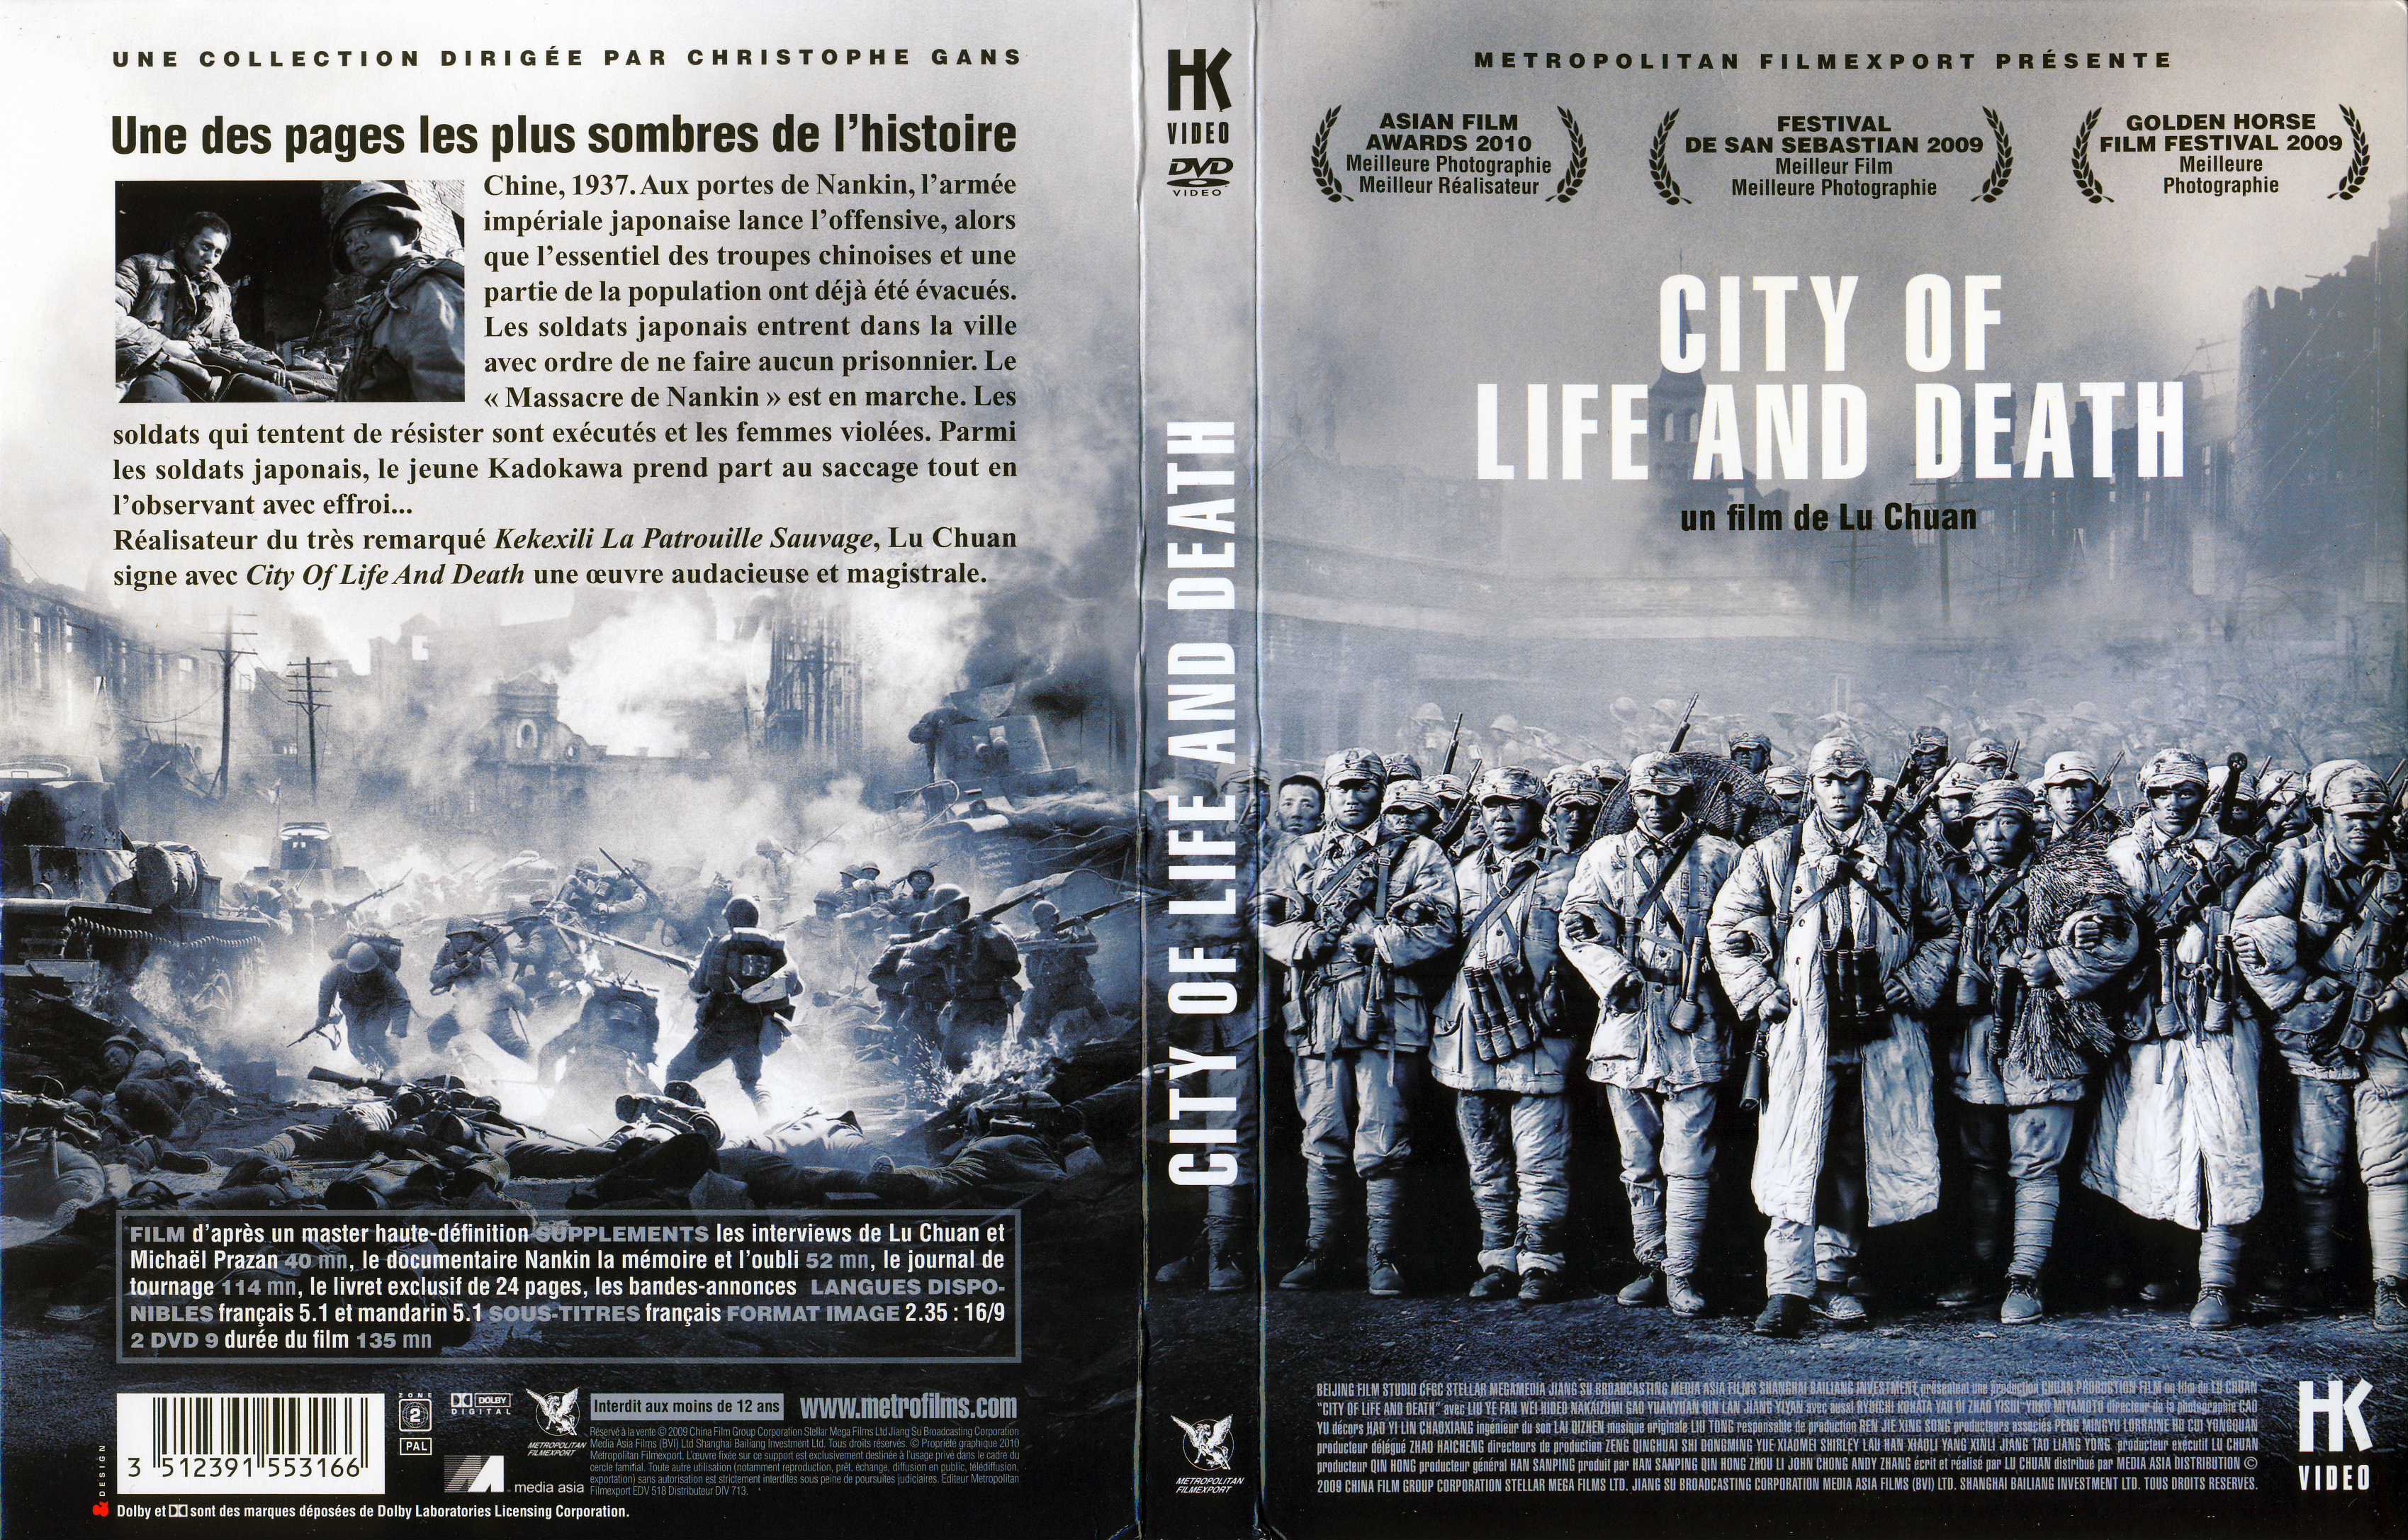 Jaquette DVD City of Life and Death